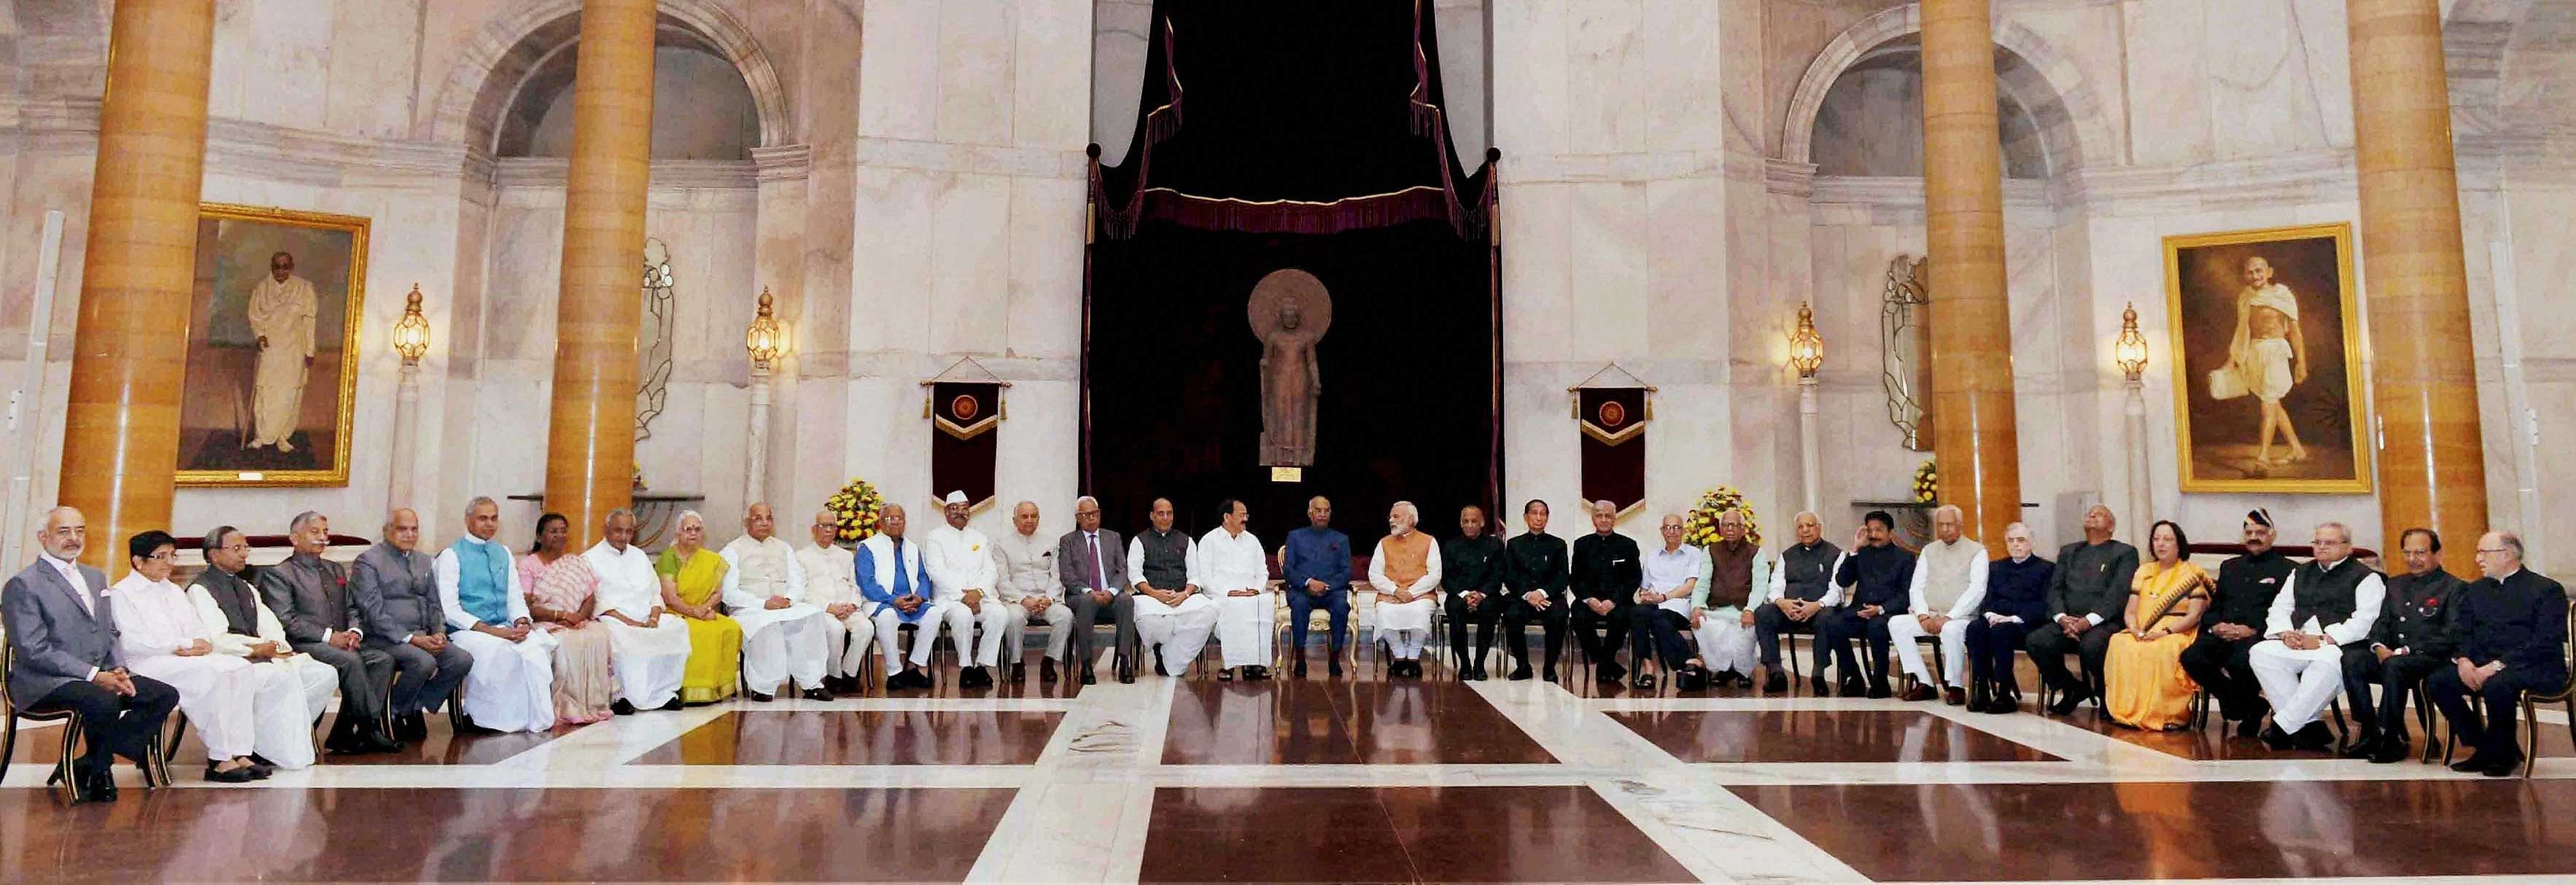 President Ram Nath Kovind poses for a group photo with Prime Minister Narendra Modi and governors during the inauguration of Conference of Governors at Rashtrapati Bhavan on Thursday. PTI photo